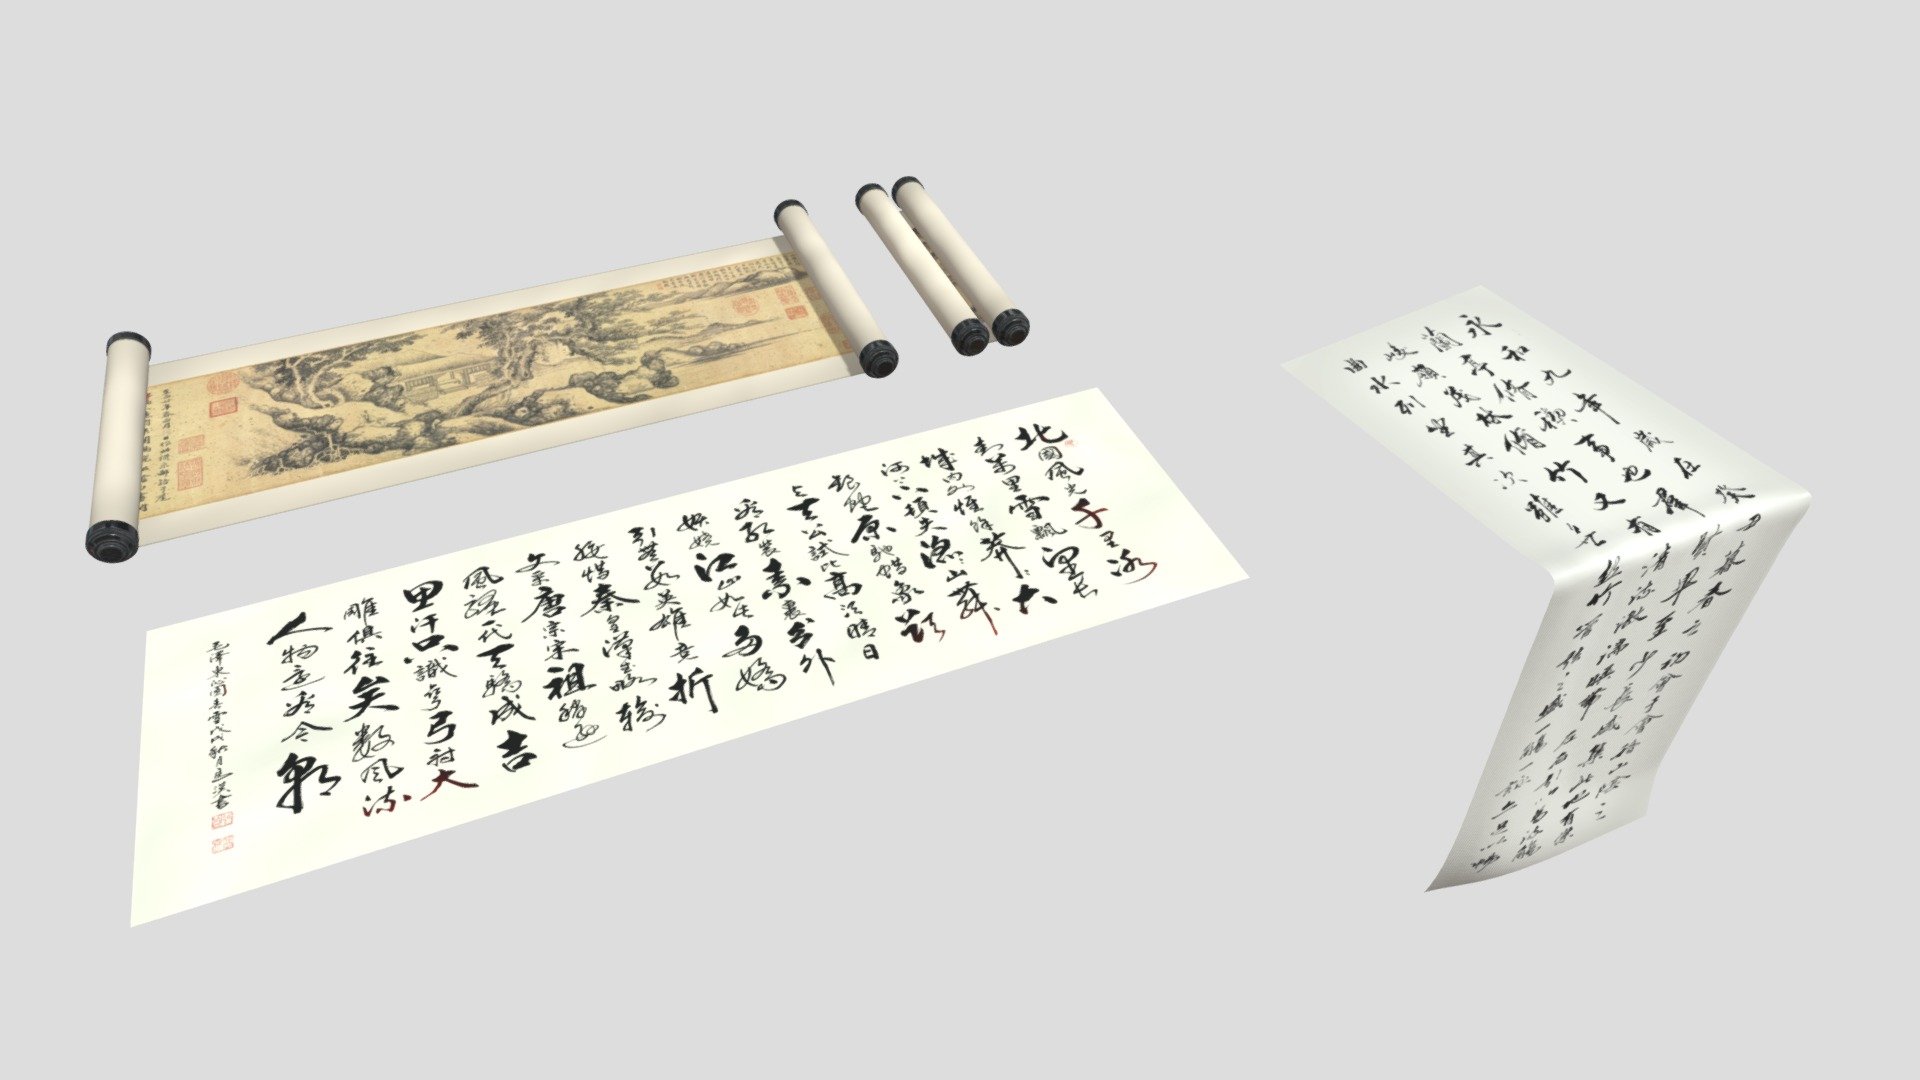 This model is a group of ancient Chinese calligraphy and paintings,
The model includes: 1 inkstone, 1 tray, 2 brush washers, 1 pair of paperweights (2 pieces)
The packet contains the following
Number of four sides: 54688
Vertices: 55572
File Type: FBX
Textures: PBR
Texture size: 4K
UV: Yes
Lighting: no
Camera: no
animation: none - Paint - Buy Royalty Free 3D model by ChineseVillage 3d model